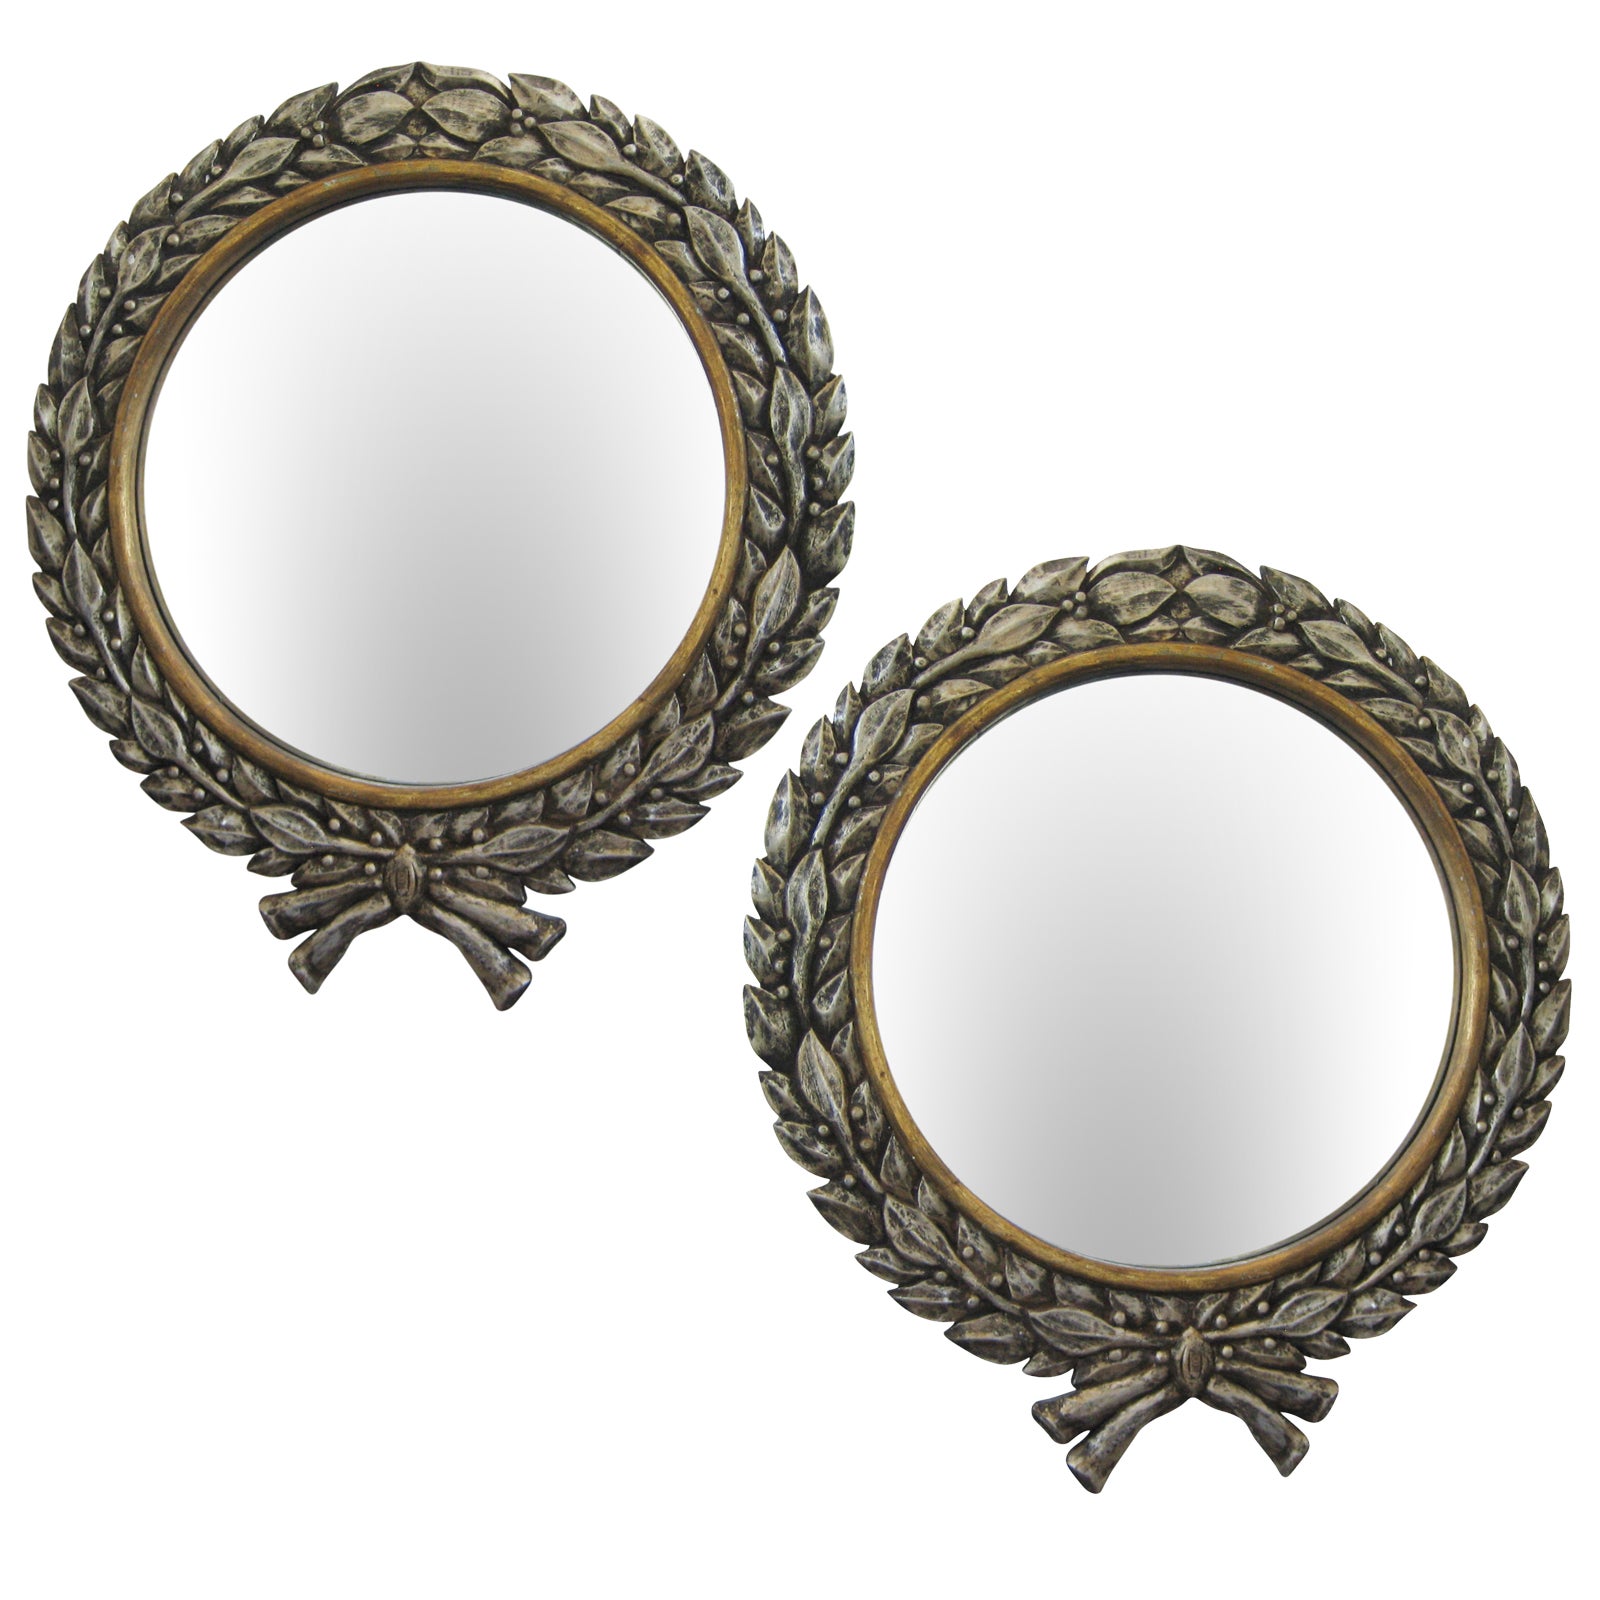 Pair of Carved Silver Giltwood Wreath Wall Mirrors